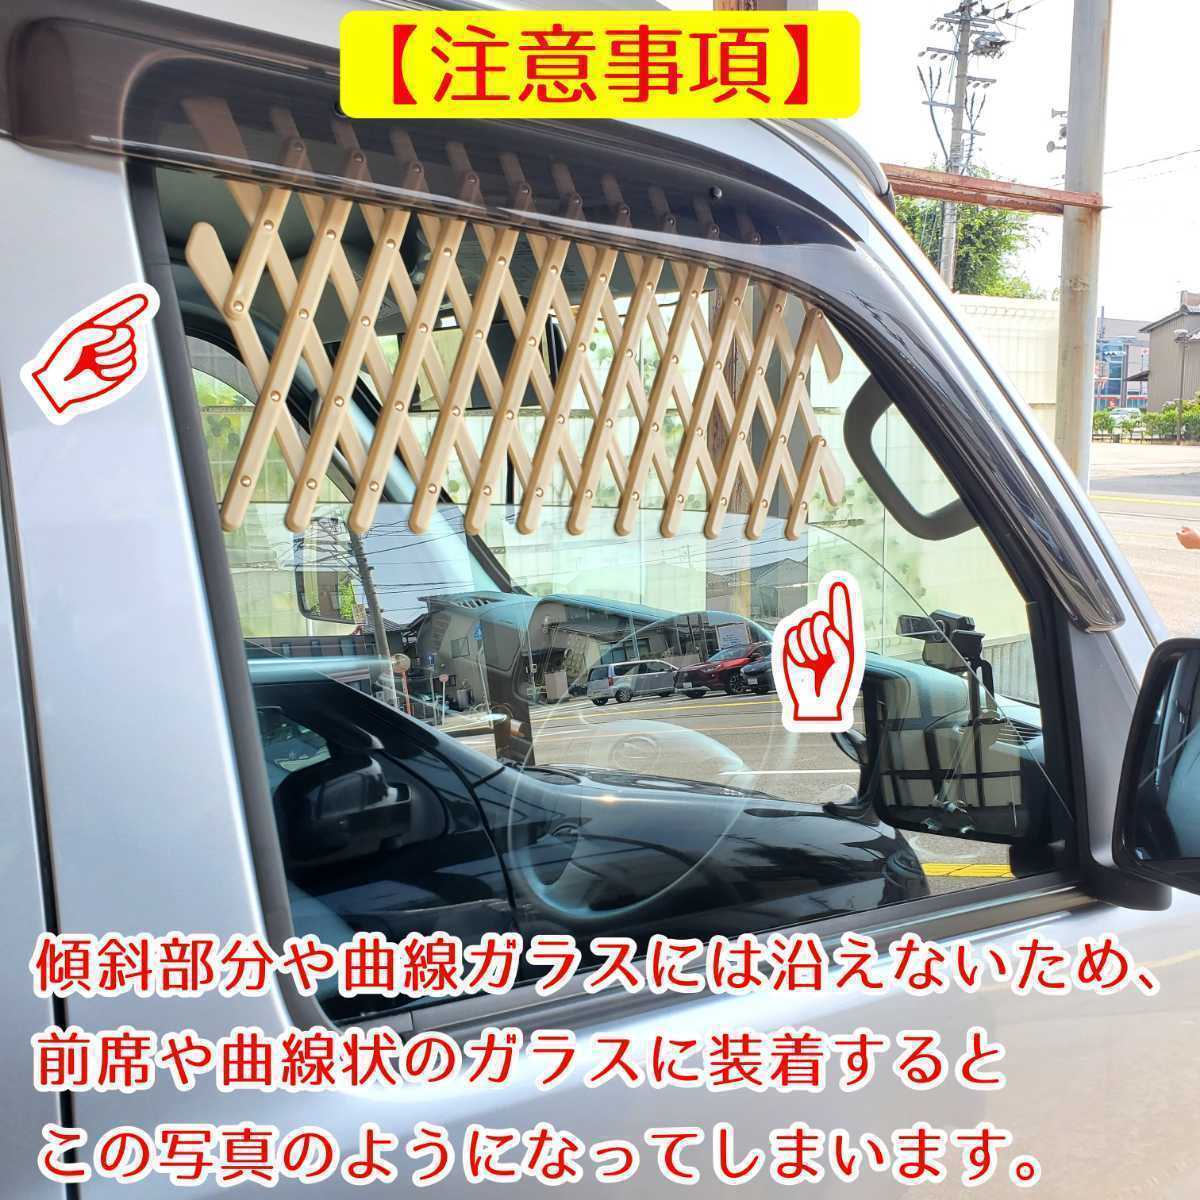 [ both for window 2 piece set ] car window lachis lattice fence .. net screen door mesh ventilation .. sleeping area in the vehicle camp parts black color black L size large 